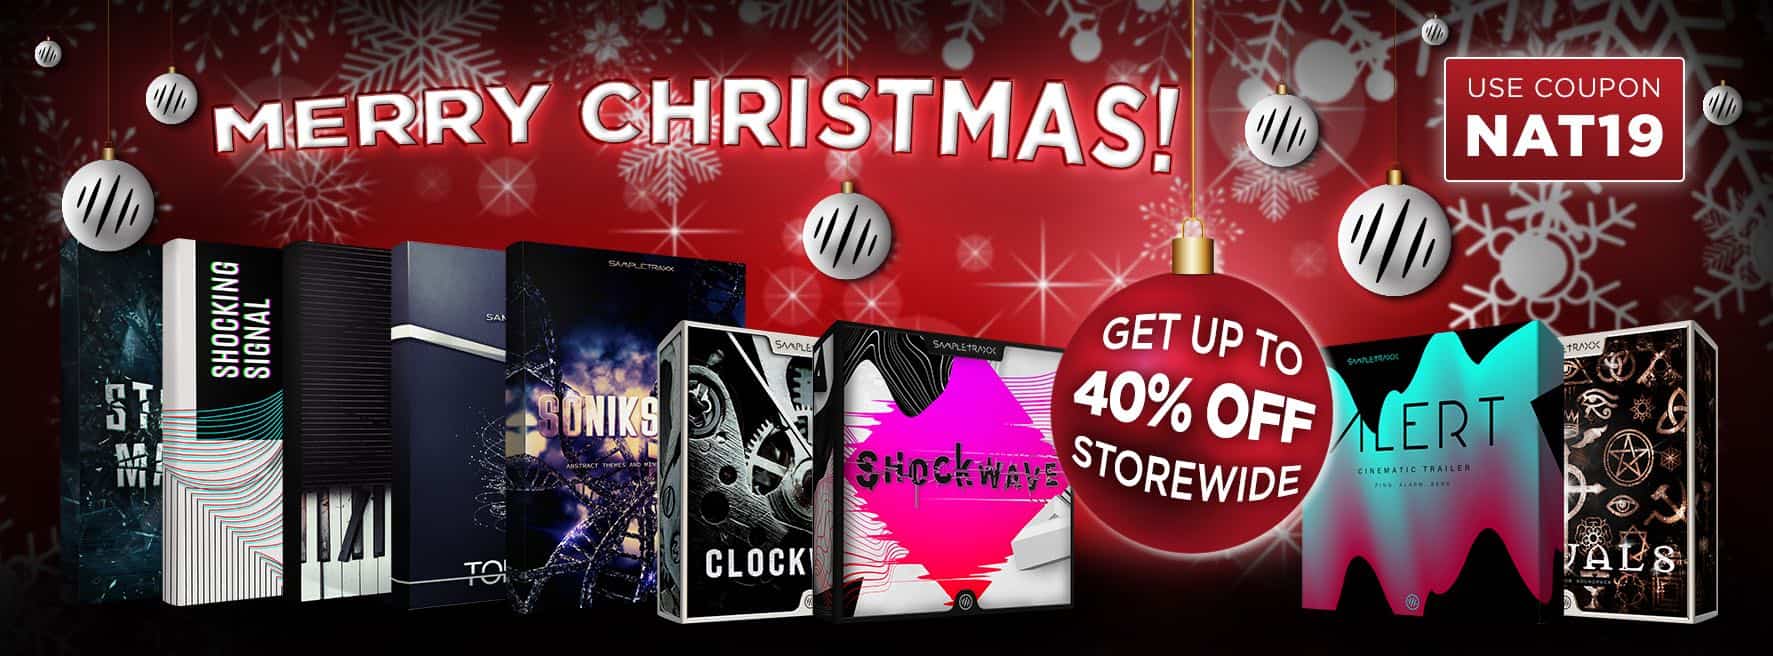 SampleTraxx Sale up to 40 off merrychristmas